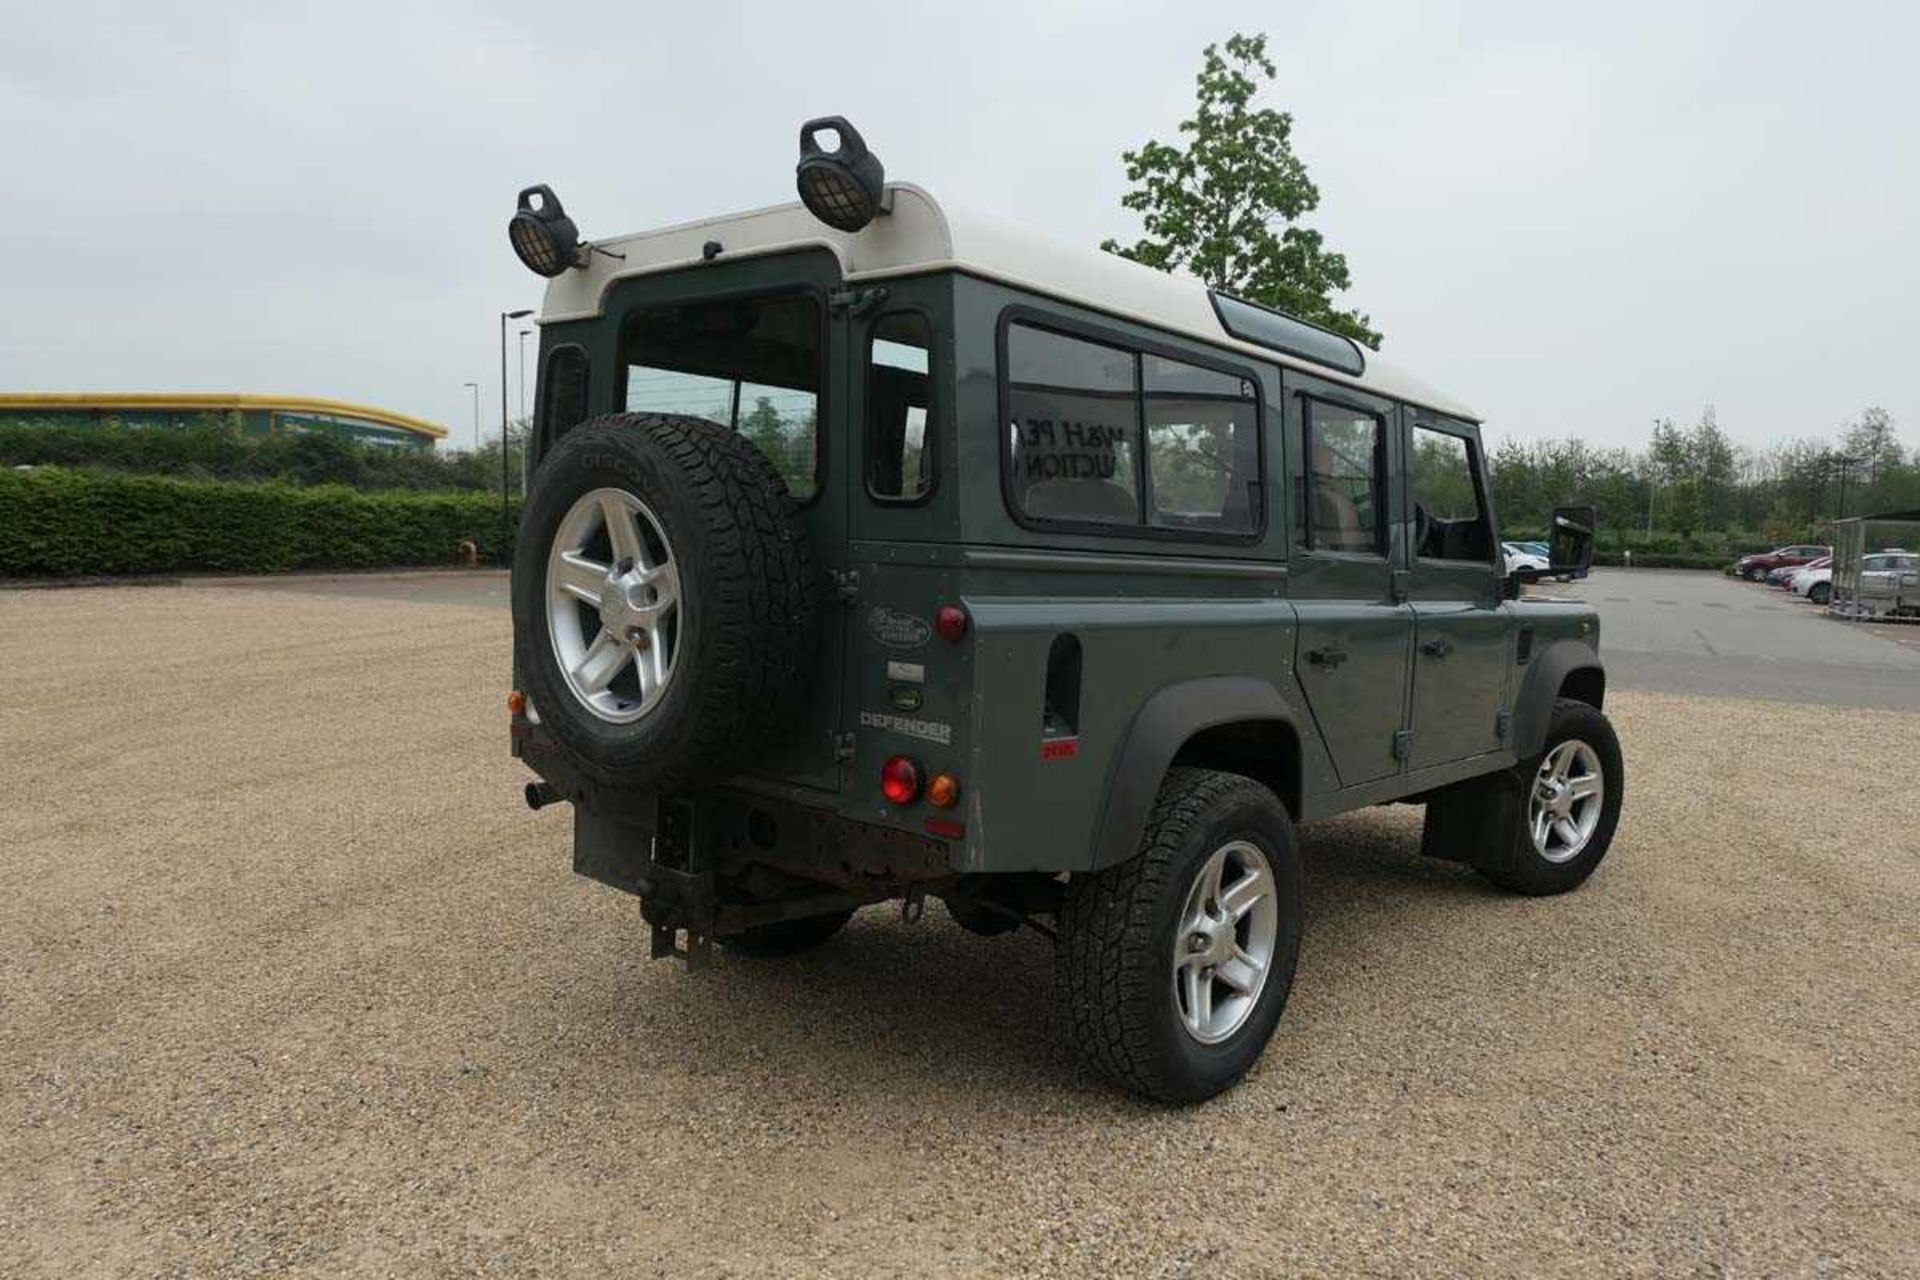 (LD58 NLV) 2008 Land Rover Defender 110 LWB station wagon estate in green, 2402cc diesel, 6-speed - Image 3 of 20